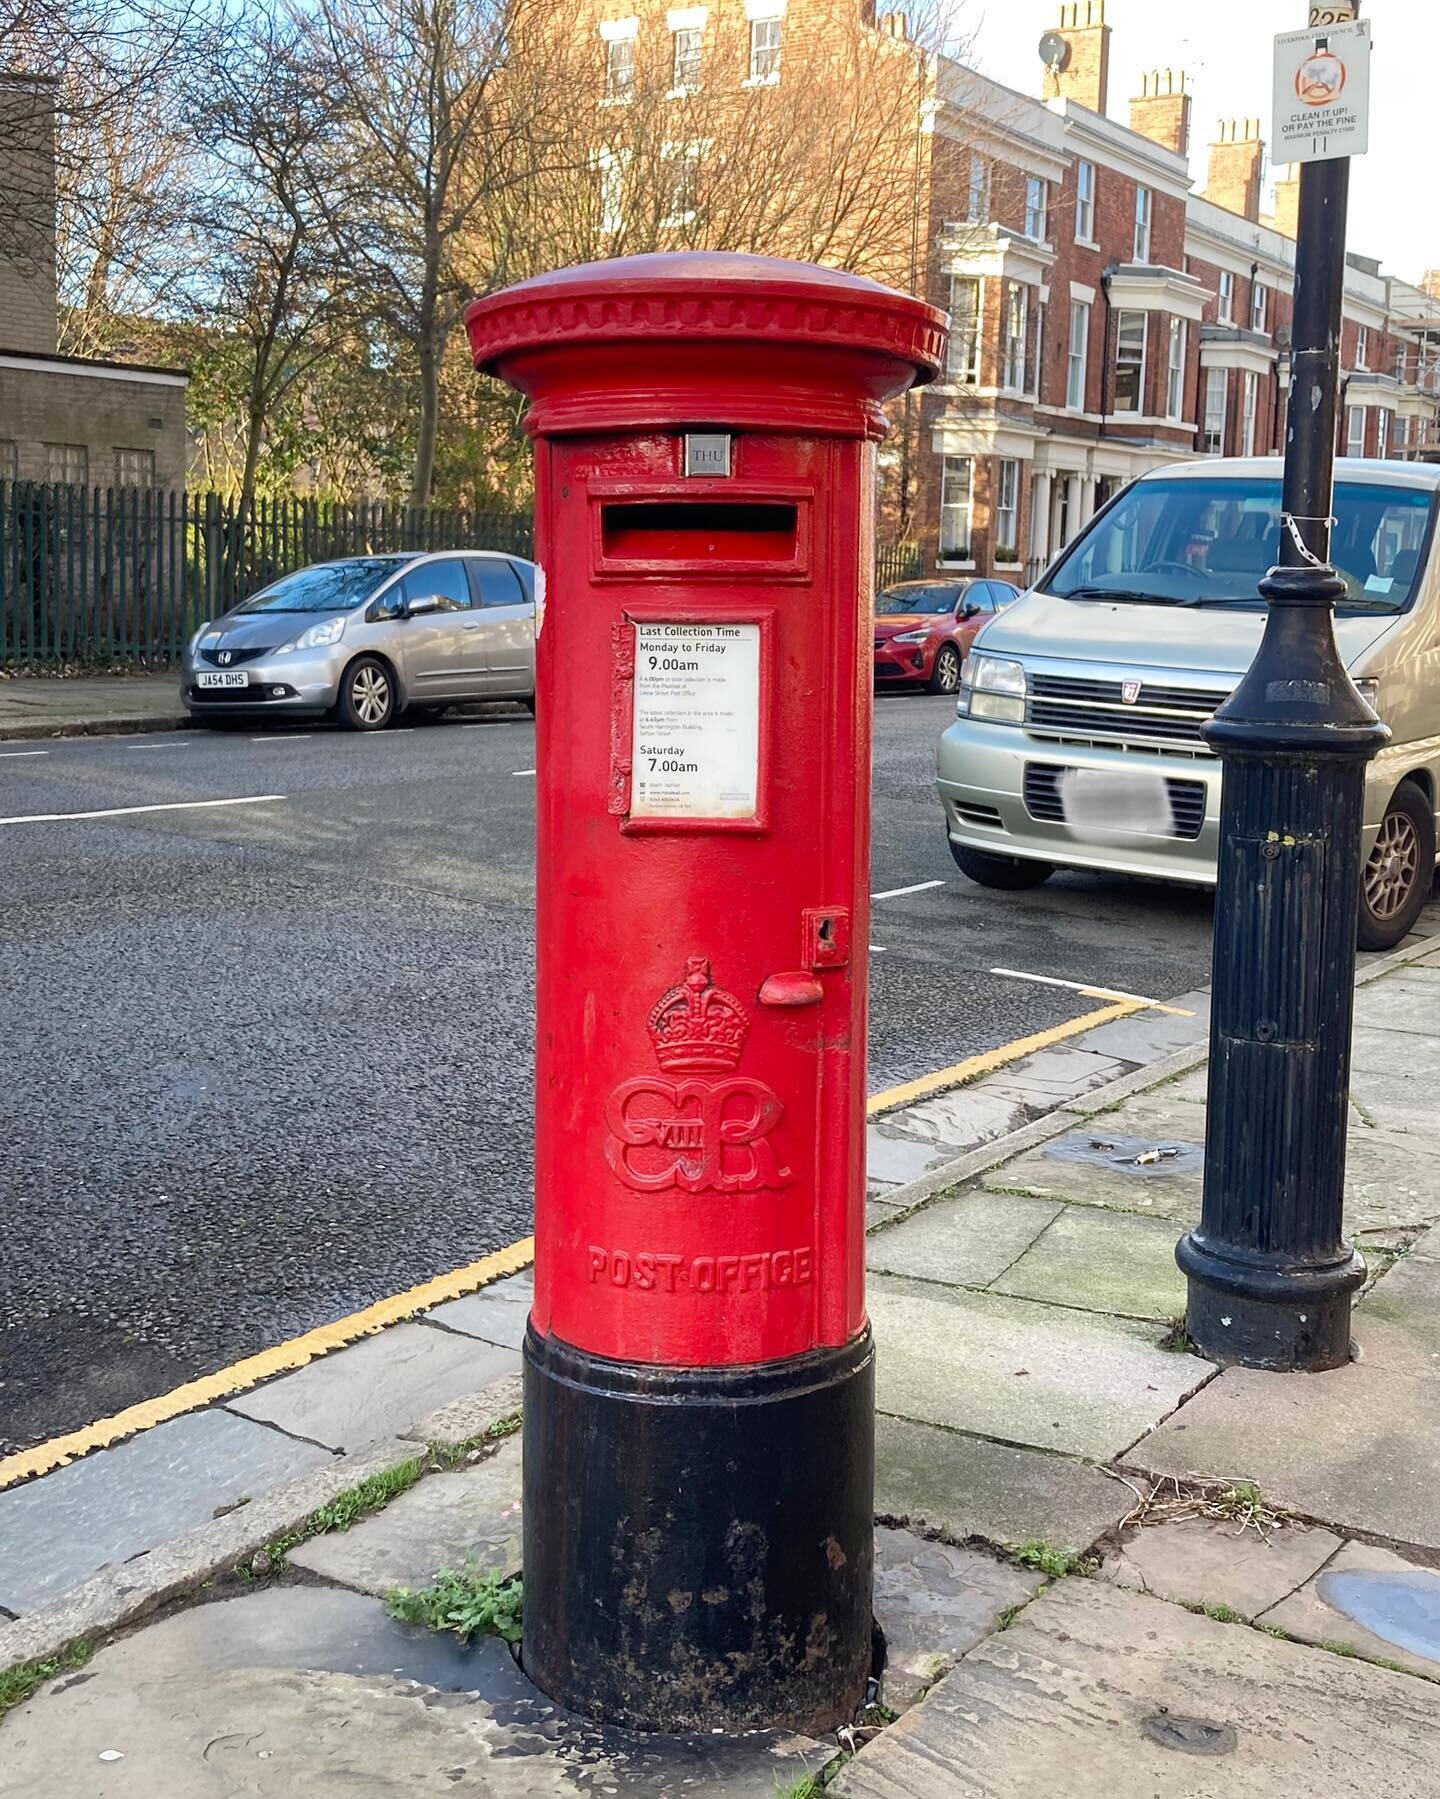 Spotted a post box bearing the Royal Cypher of King Edward VIII. These are very rare as Edward reigned for less than a year, abdicating in December 1936. Most boxes with his cypher were modernised or replaced, but not this one. The Letter Box Study G